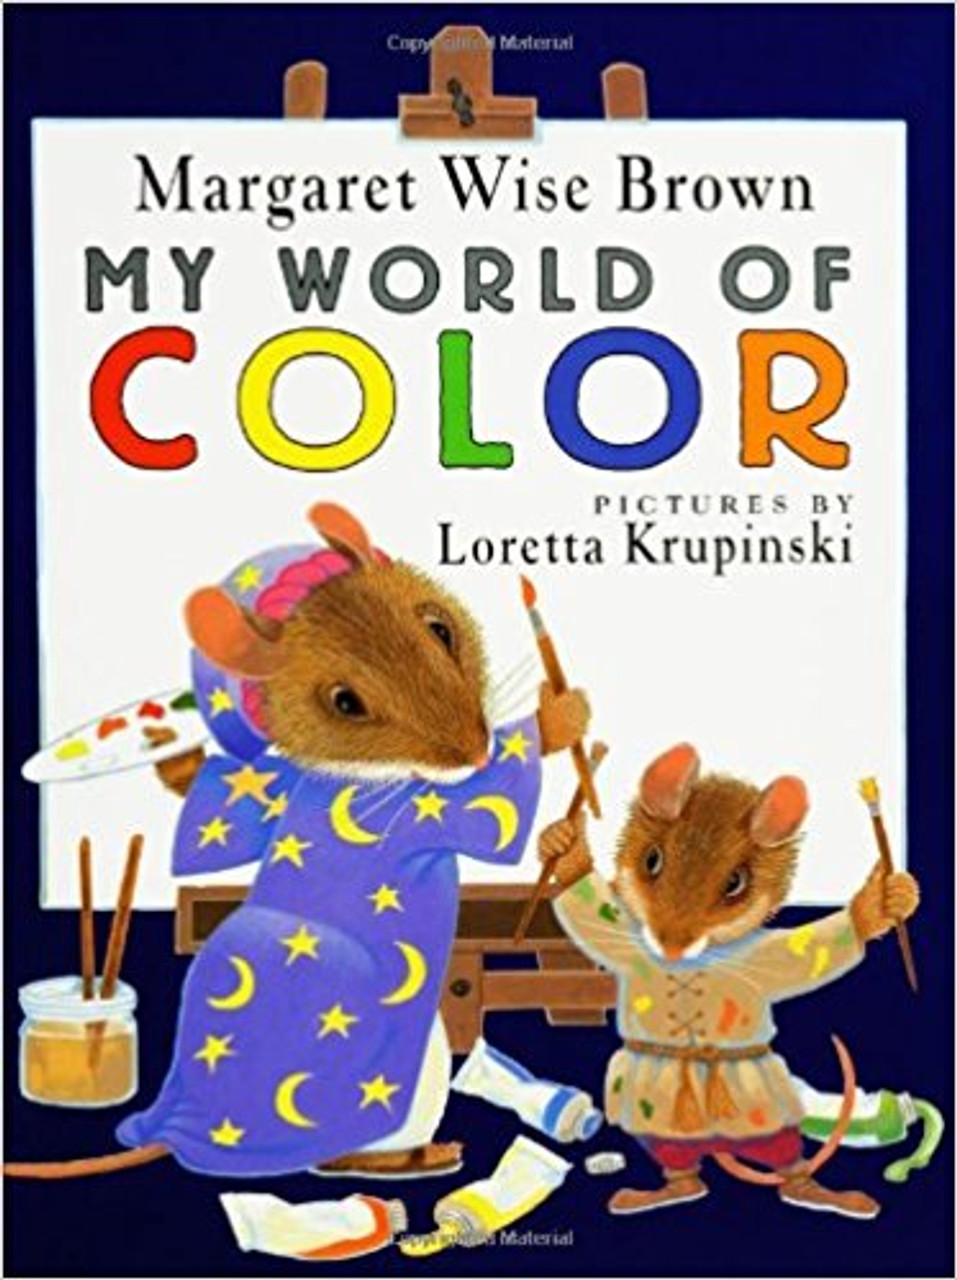 Wise Brown introduces the world of color to children with wonderfully playful, lyrical text, paired with Krupinski's jewel-toned, detailed illustrations.